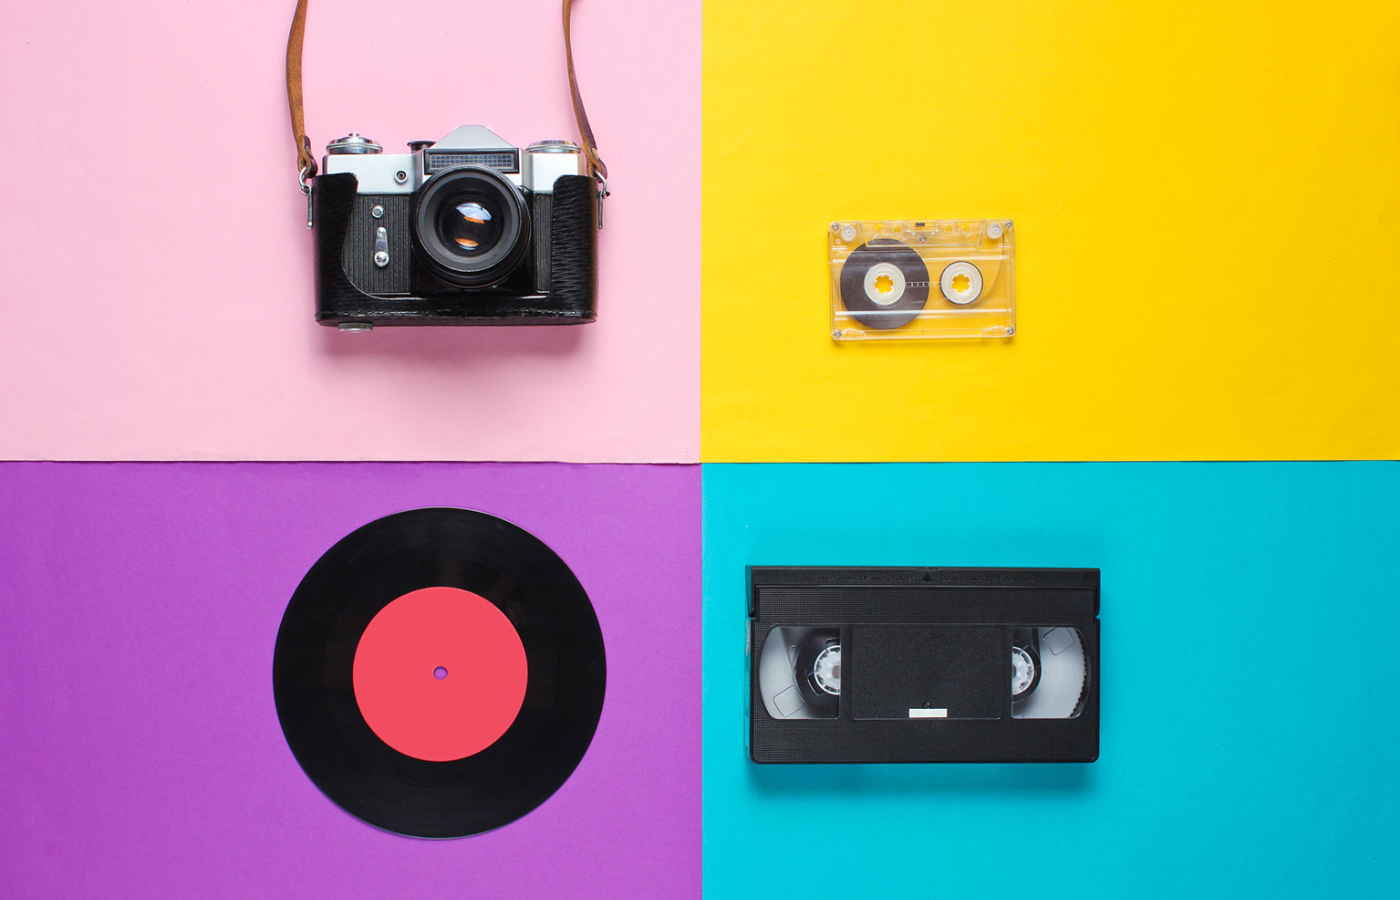 A colourful image featuring a camera, a tape, a vinyl record and a video tape